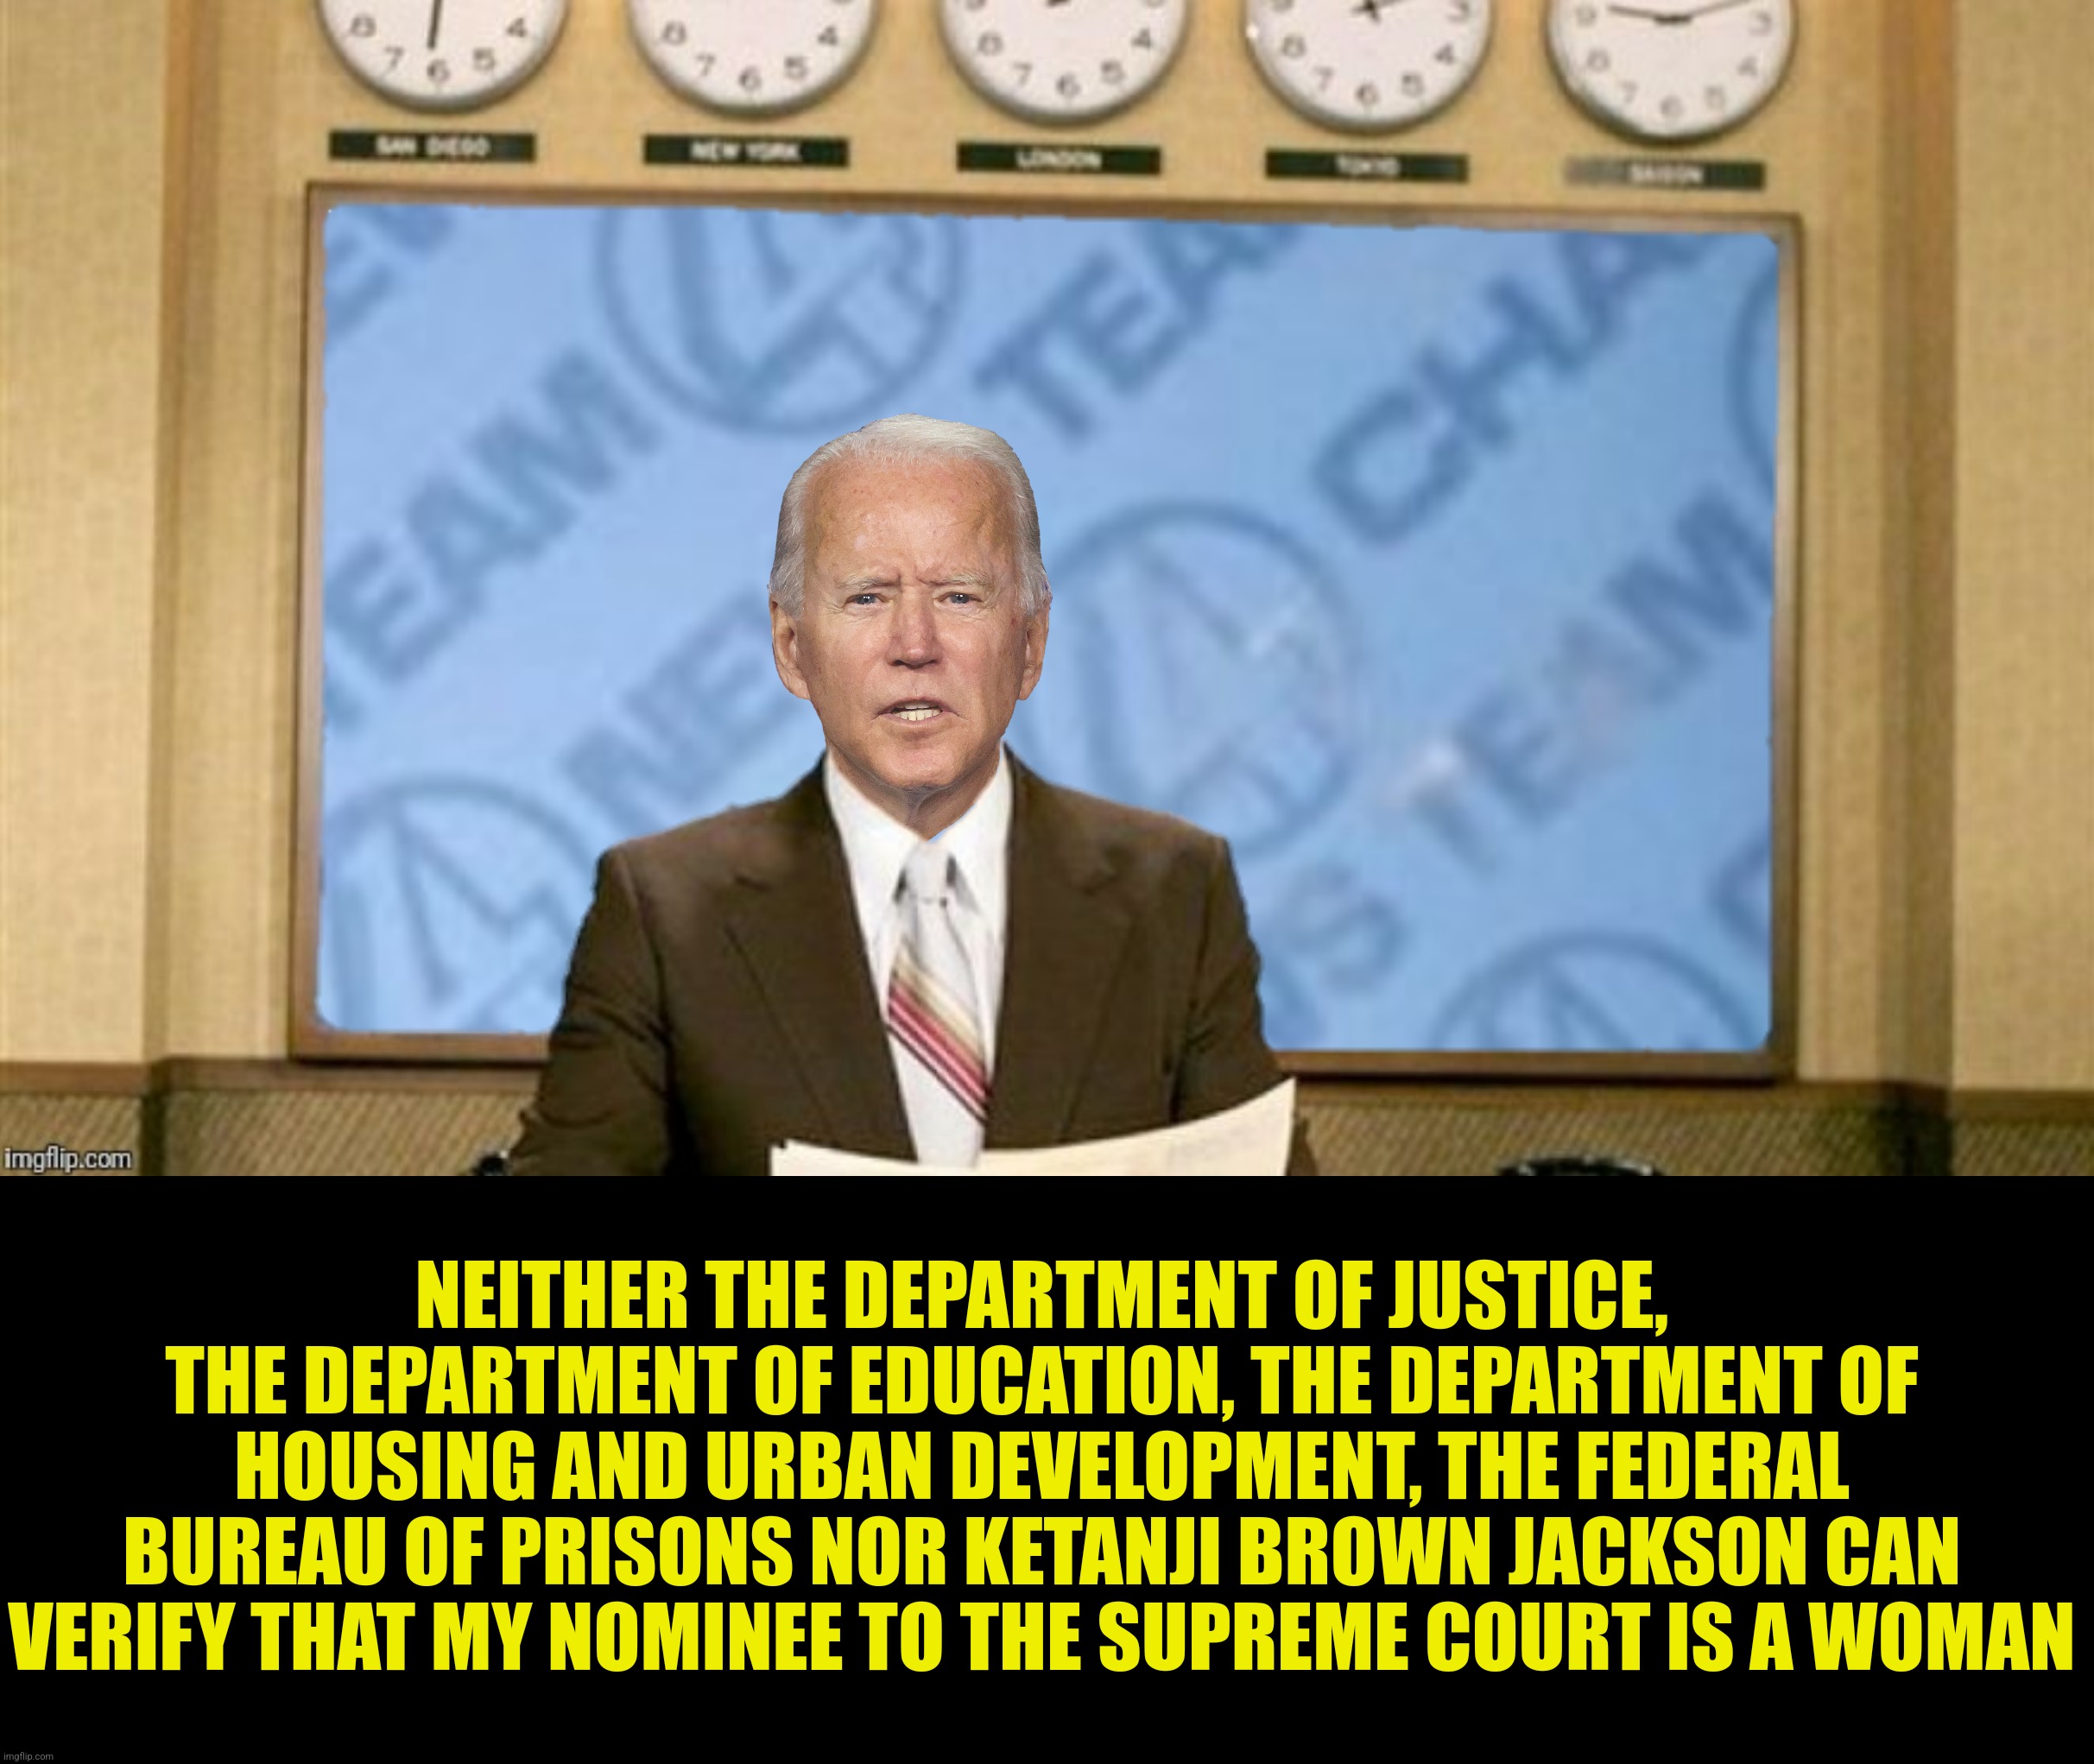 The first black they/them Supreme Court nominee | NEITHER THE DEPARTMENT OF JUSTICE, THE DEPARTMENT OF EDUCATION, THE DEPARTMENT OF HOUSING AND URBAN DEVELOPMENT, THE FEDERAL BUREAU OF PRISONS NOR KETANJI BROWN JACKSON CAN VERIFY THAT MY NOMINEE TO THE SUPREME COURT IS A WOMAN | image tagged in bad photoshop,joe biden,ron burgundy,ketanji brown jackson | made w/ Imgflip meme maker